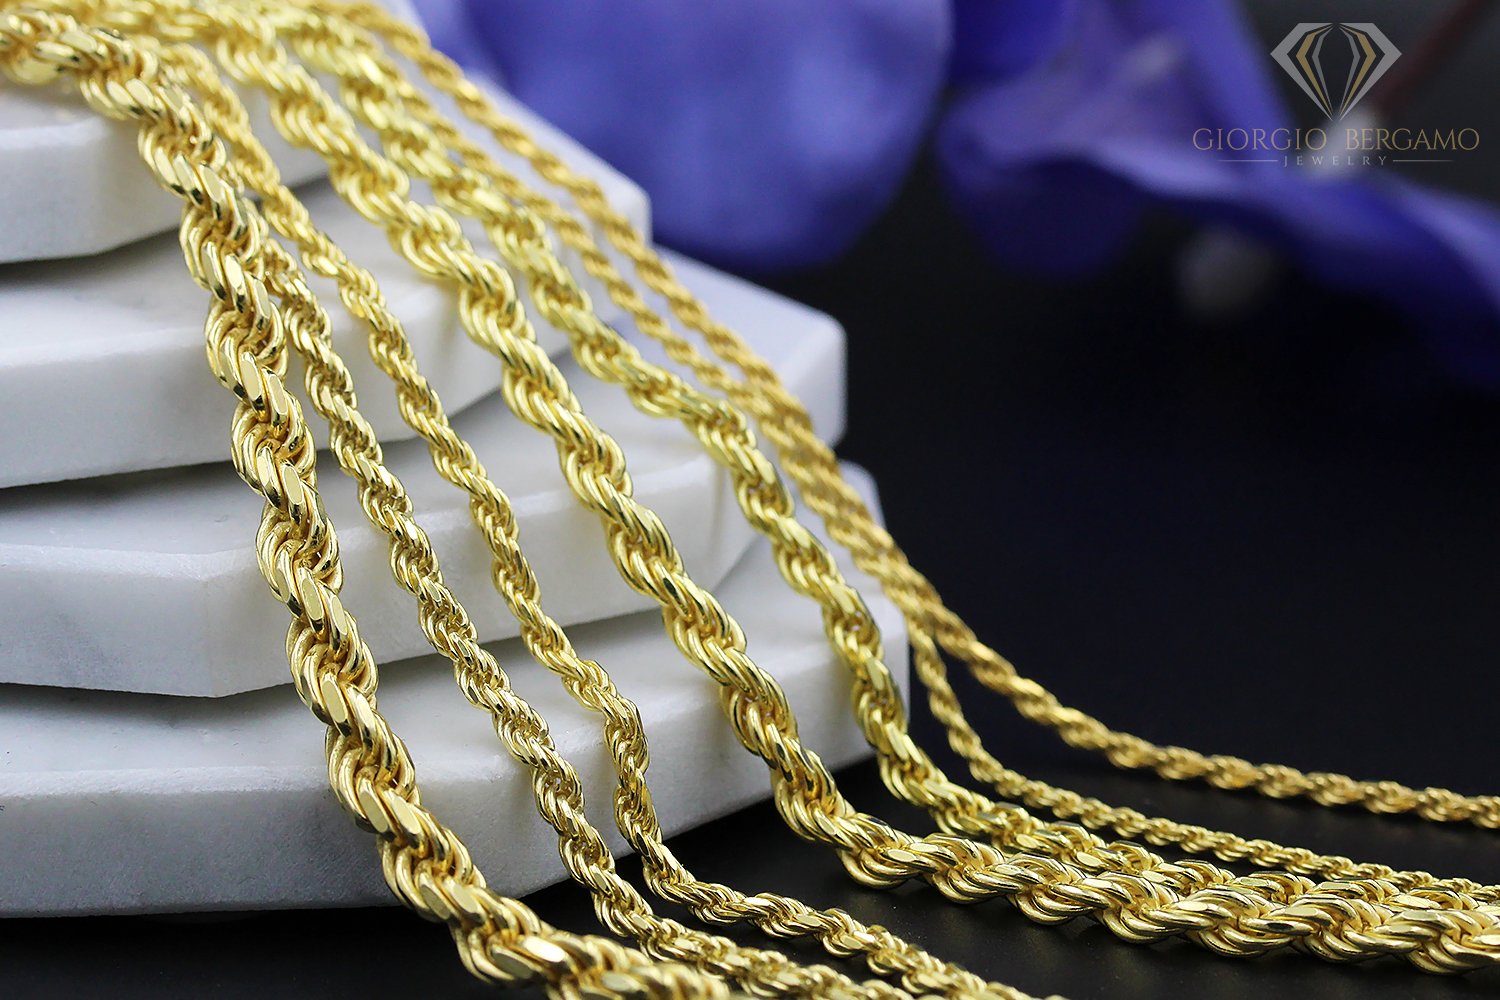 14K Yellow Gold 2mm Solid Rope Diamond Cut Chain